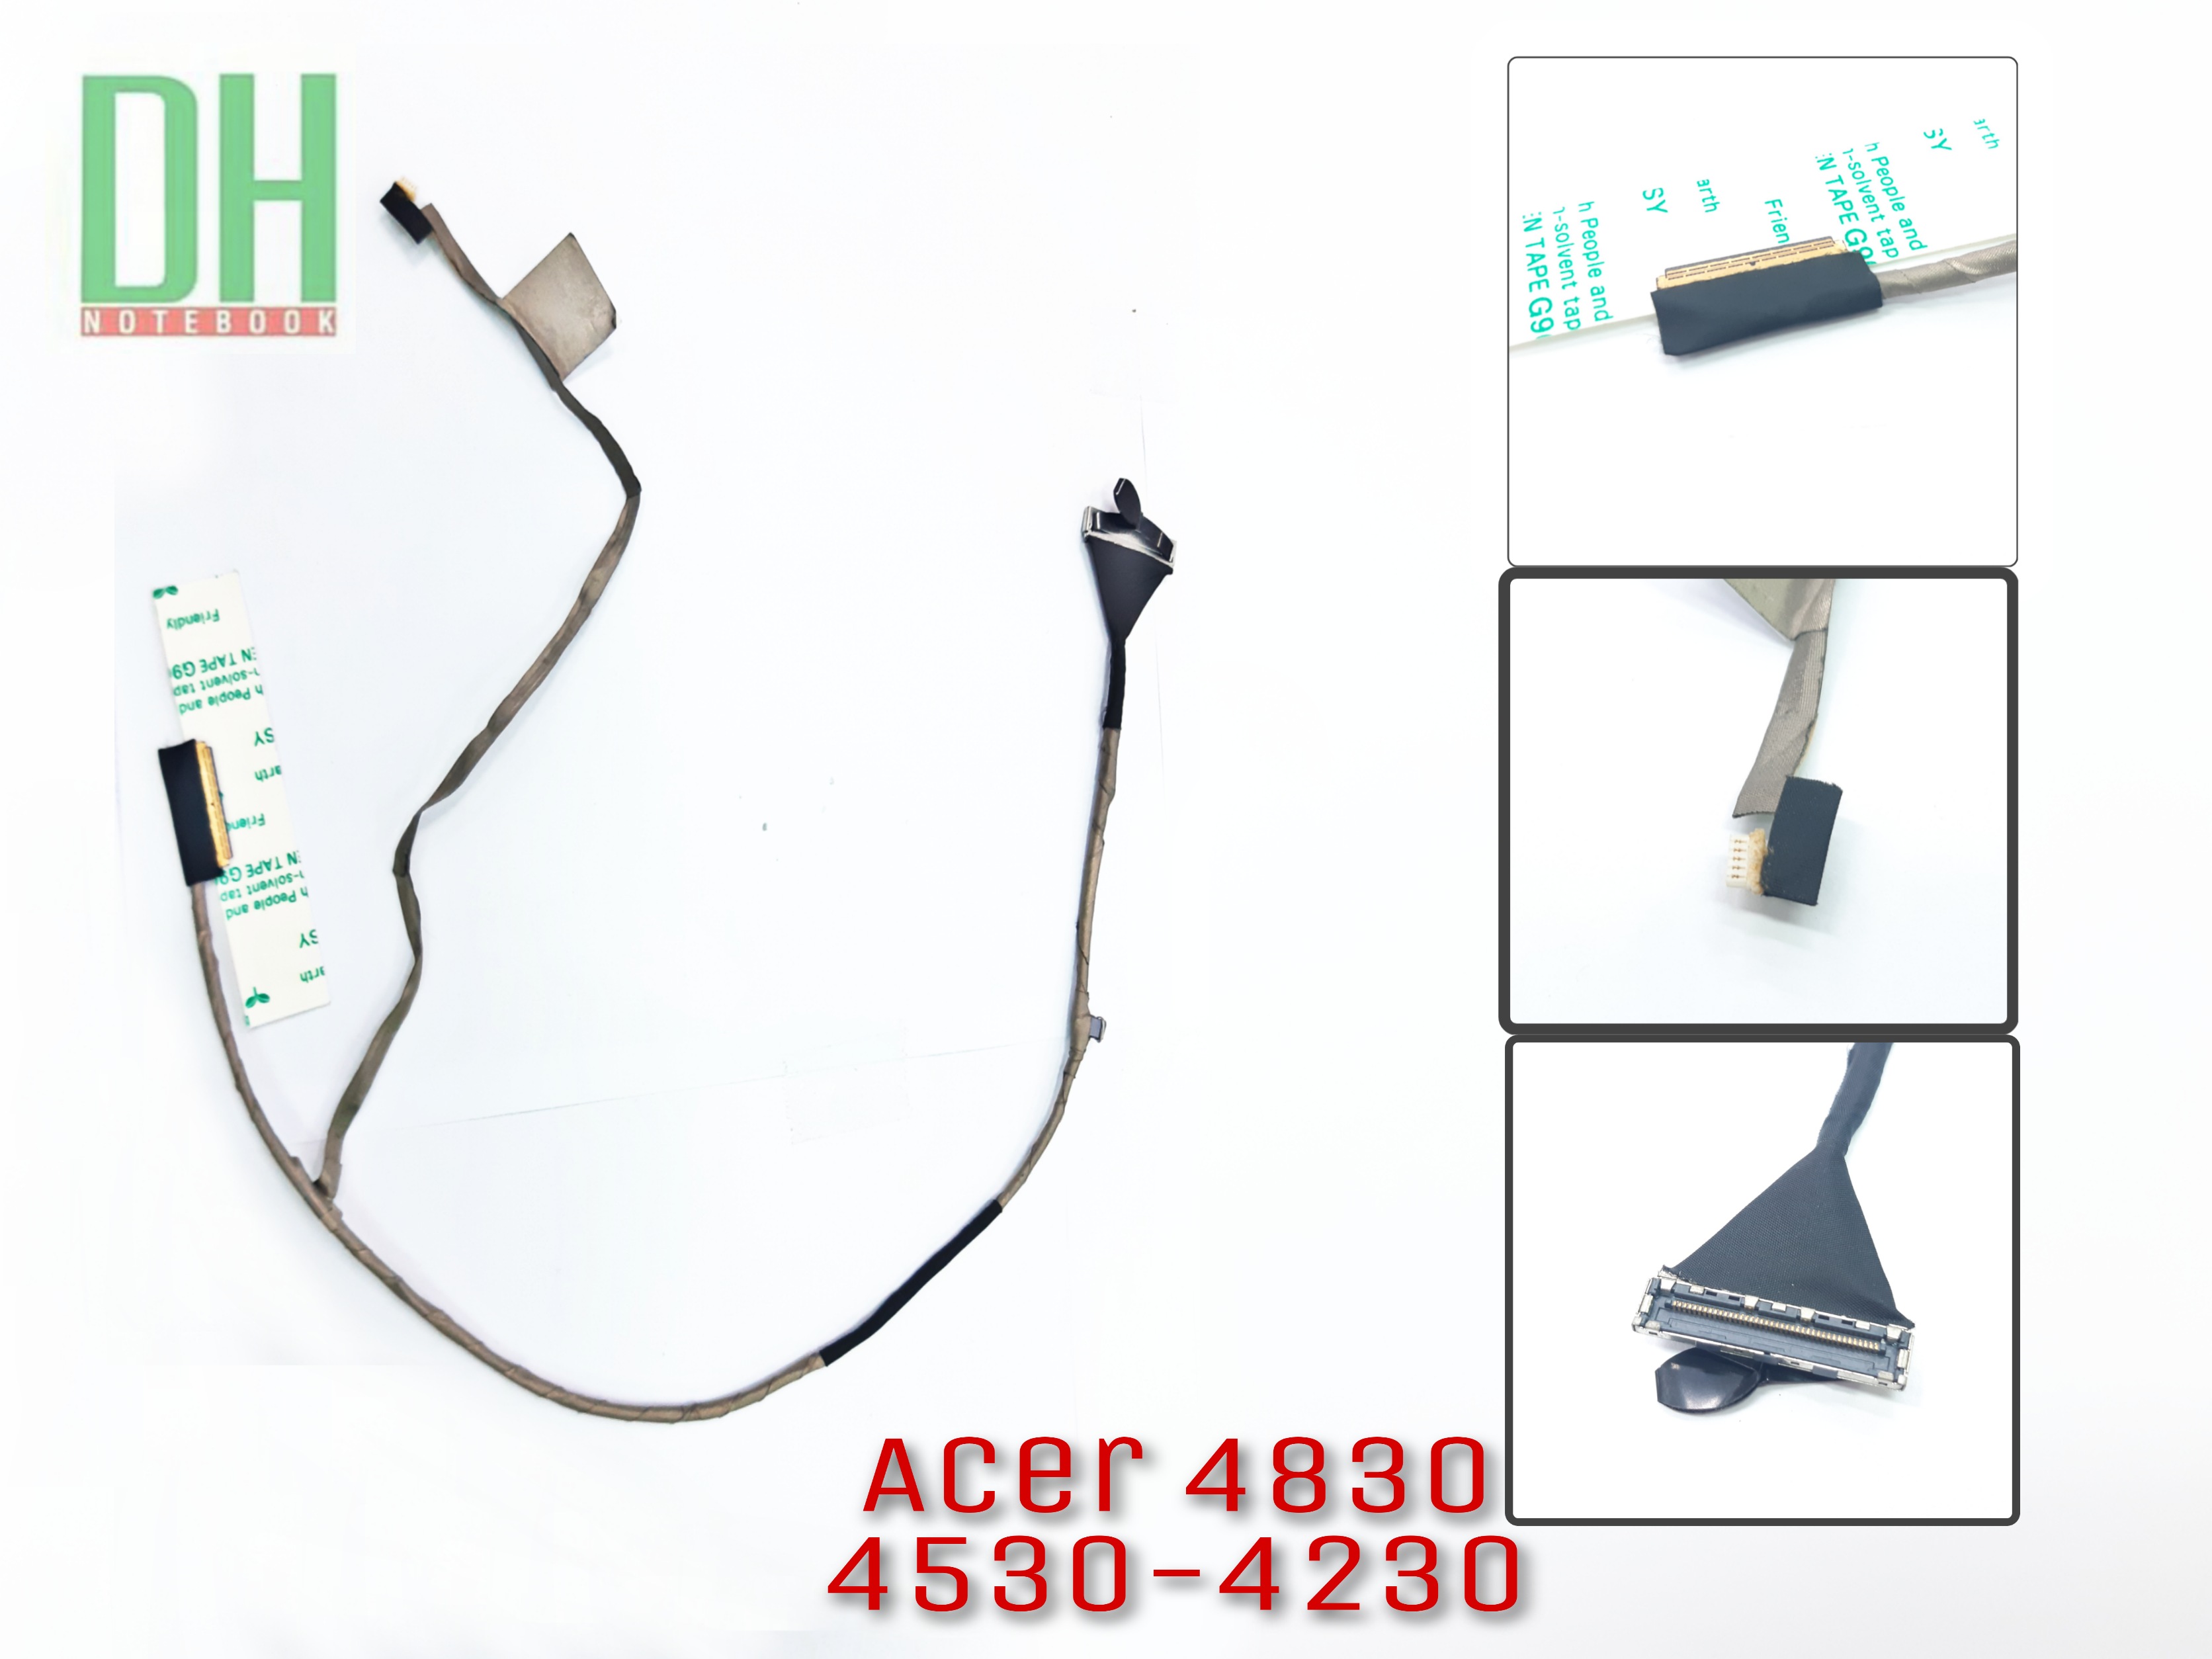 Acer 4830 Video Cable